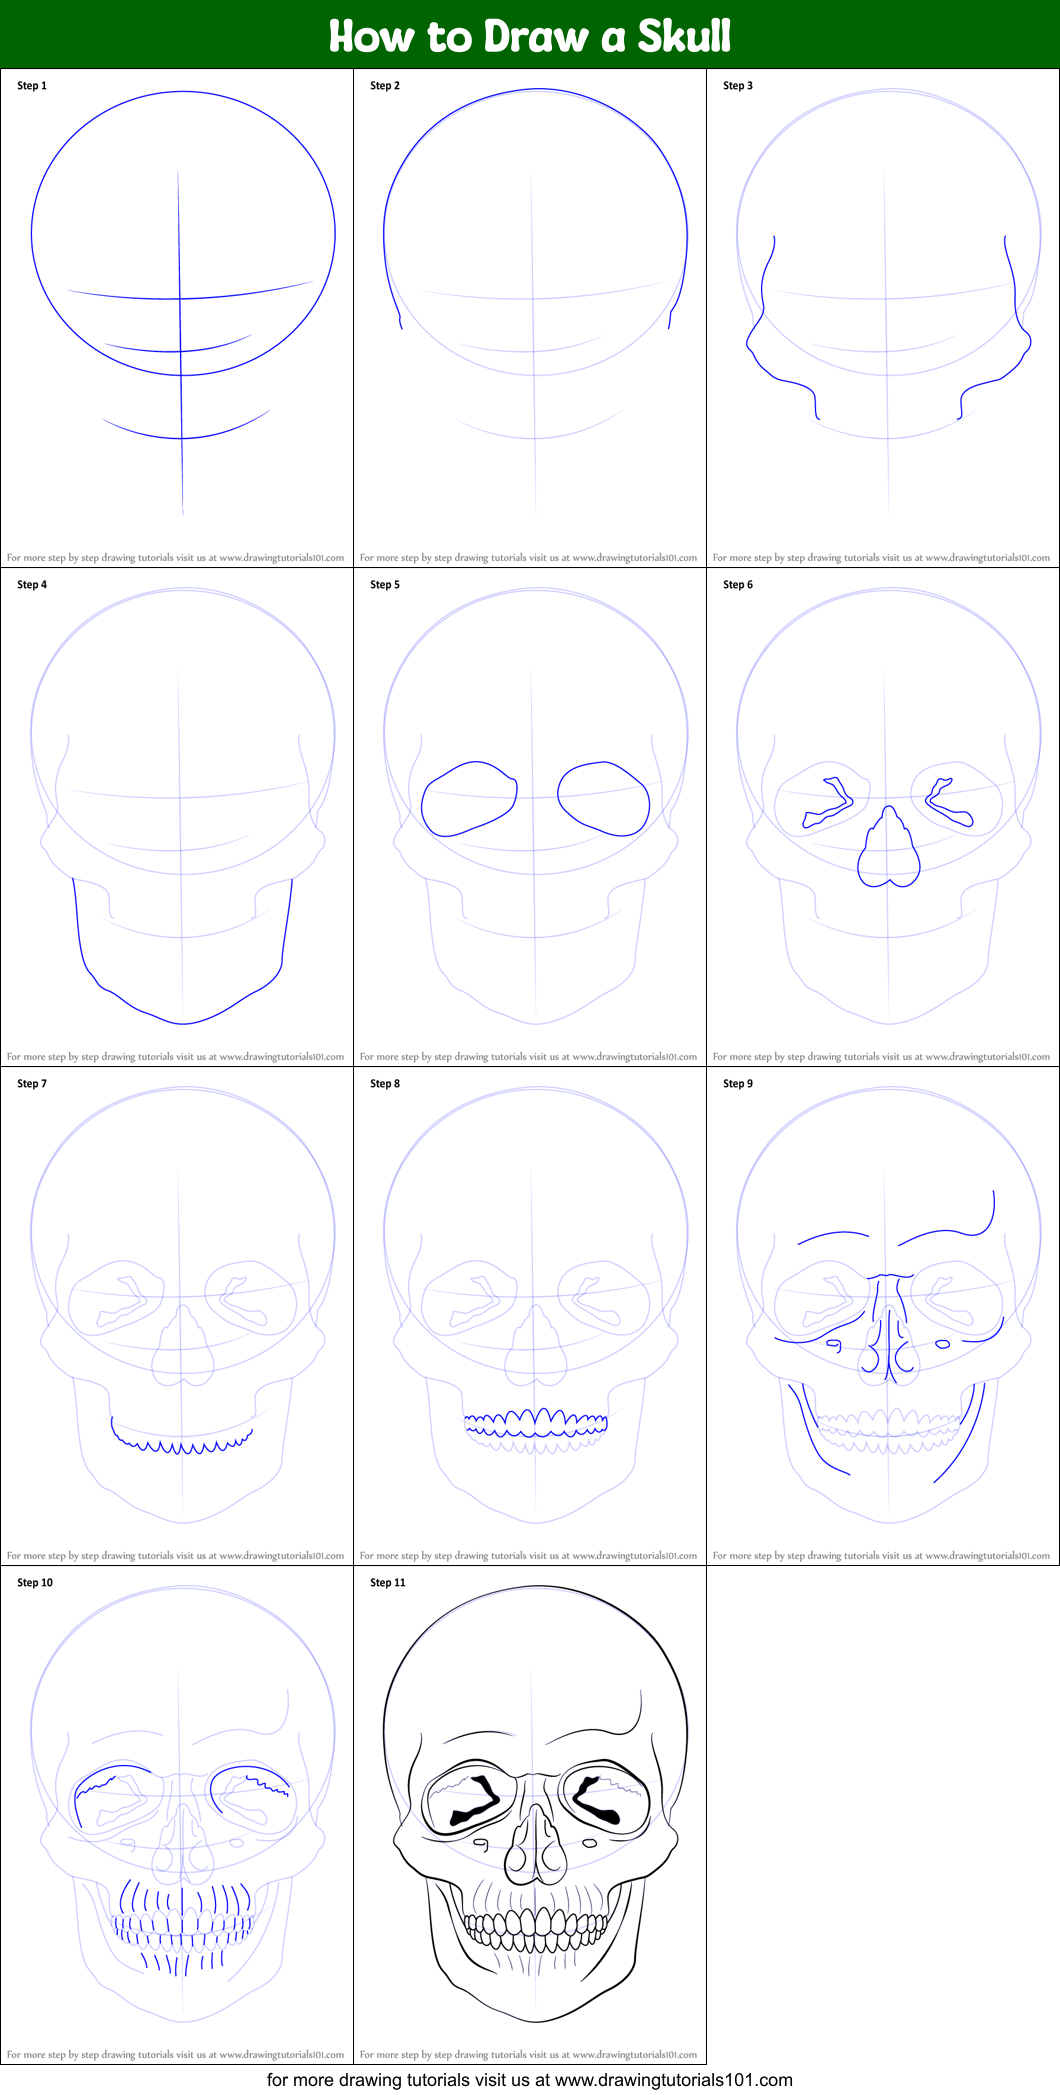 How To Draw A Human Skull Step By Step Drawing Tutorials Skulls ...